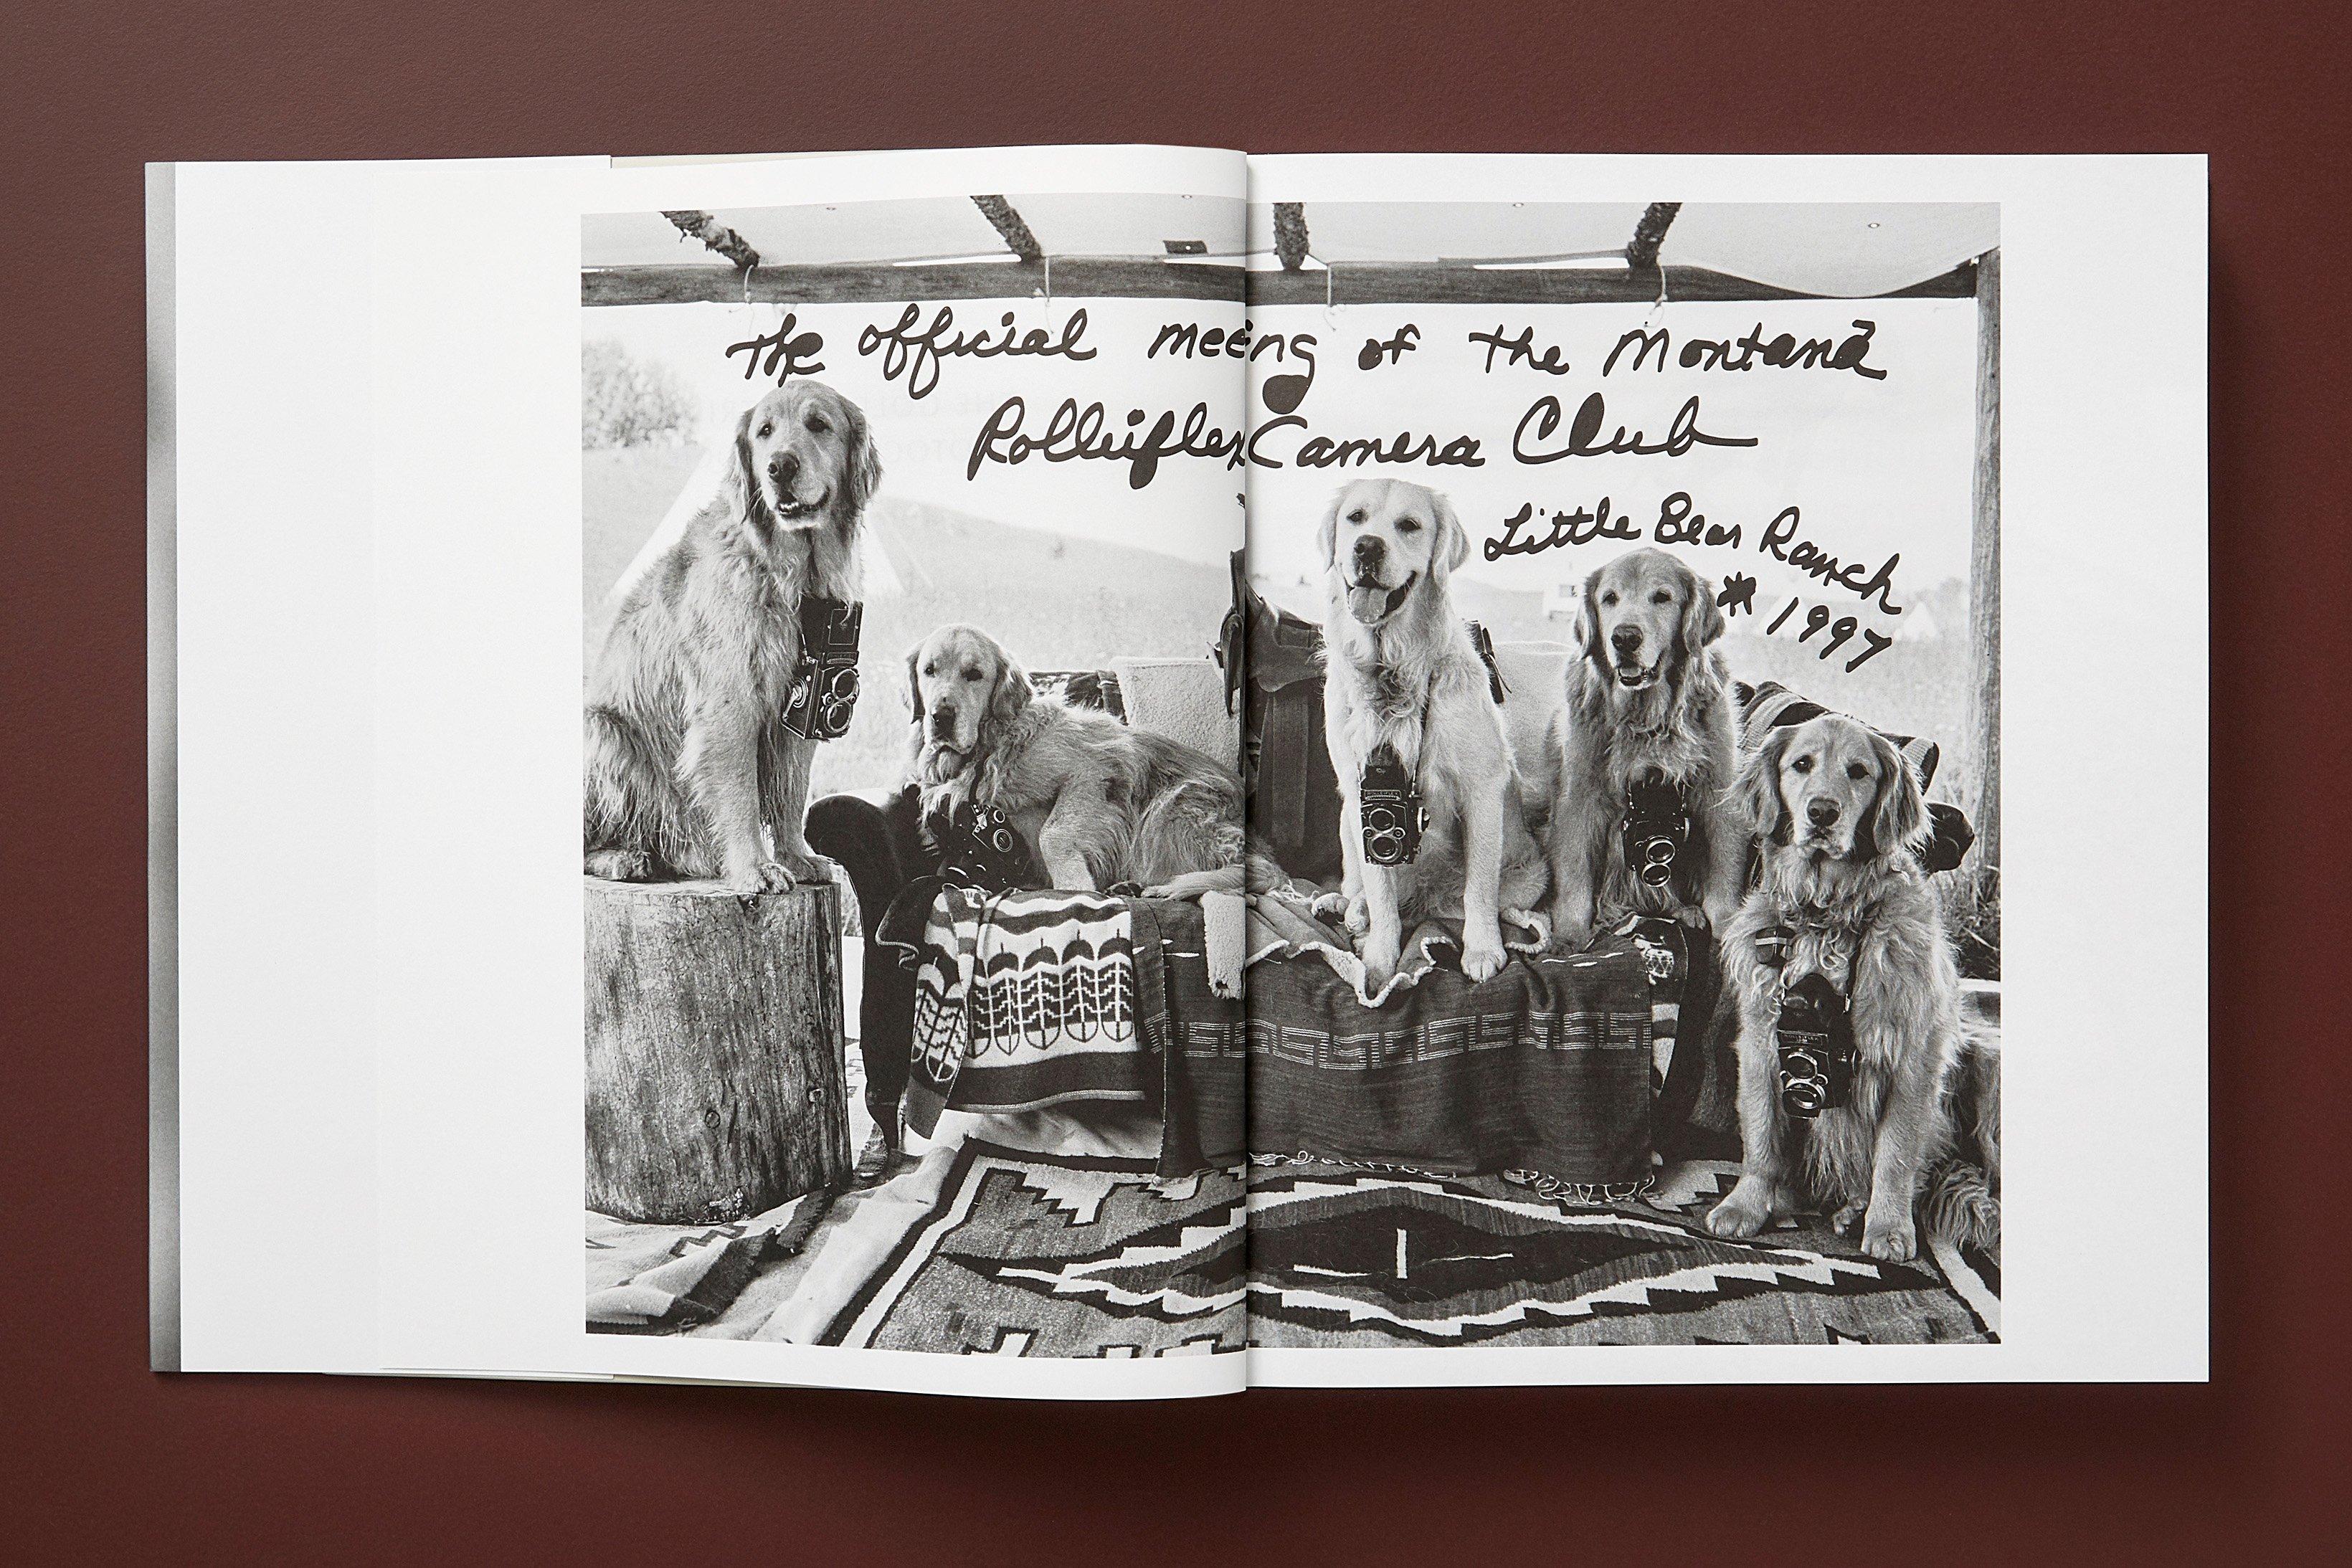 Friends for Life
Bruce Weber’s photographs of the dogs always by his side
The photographer and filmmaker Bruce Weber is associated with a wide array of imagery: humanist portraits of artists, actors, and athletes; fashion spreads charged with